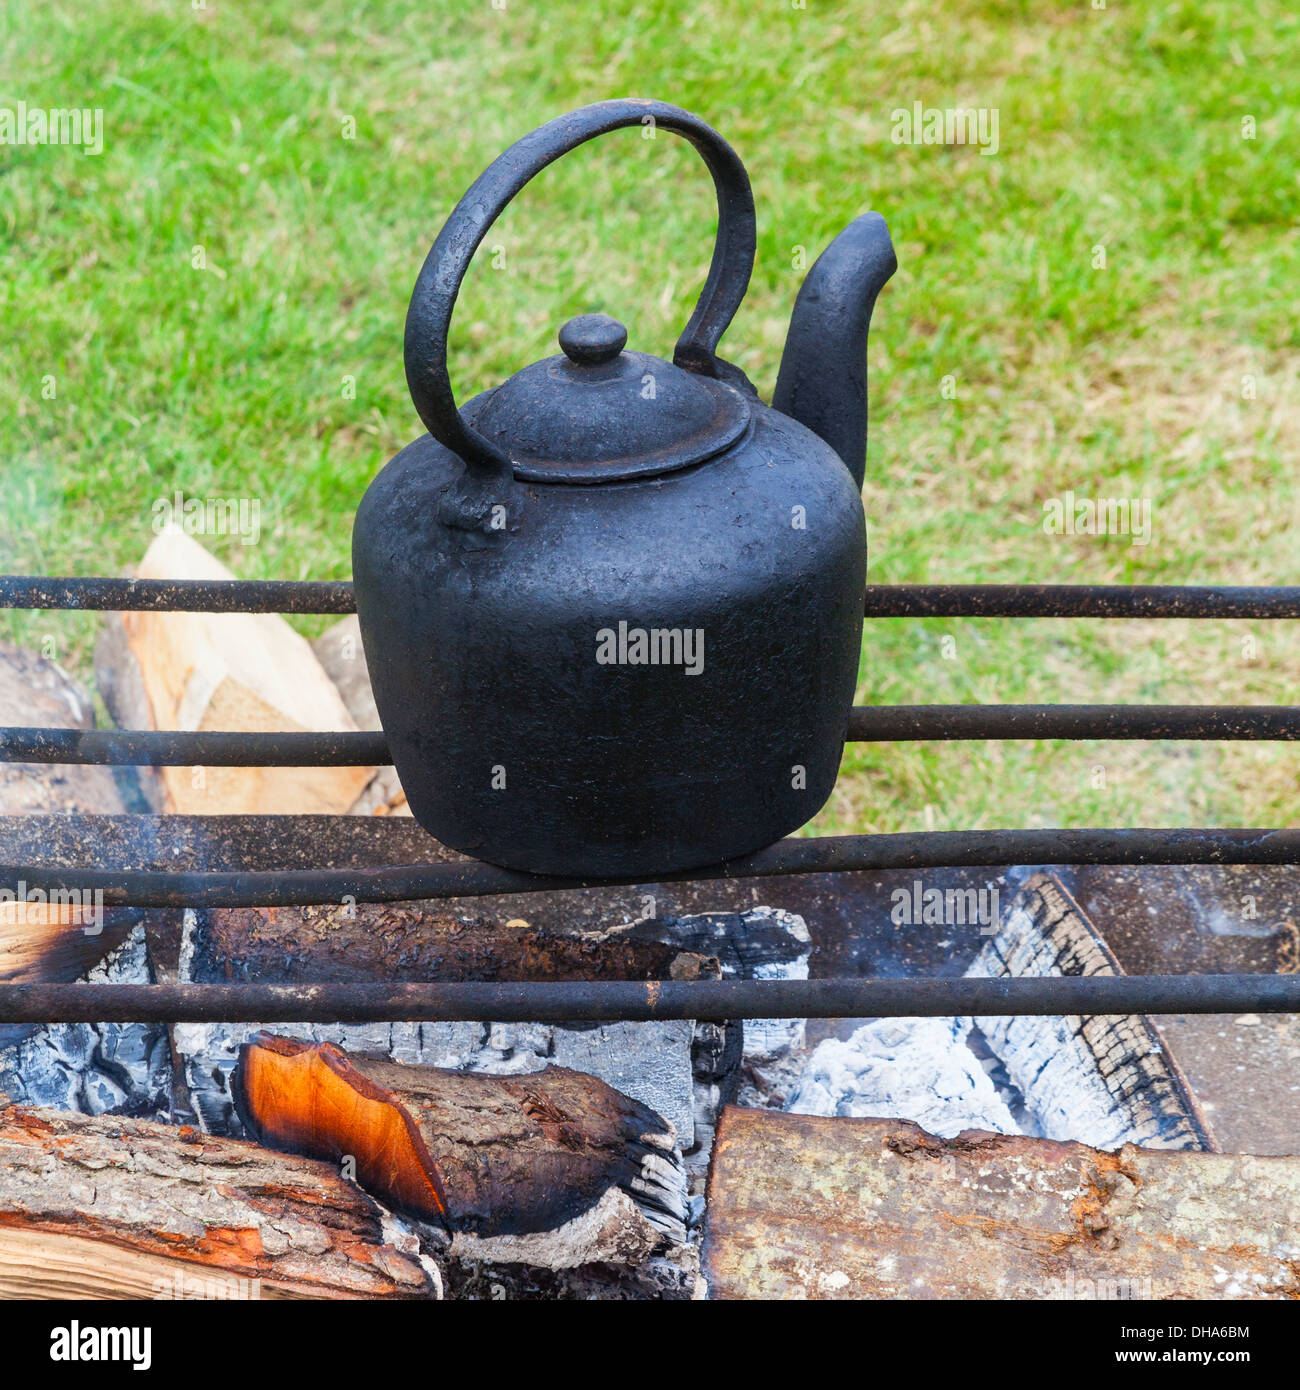 A kettle on a campfire Stock Photo